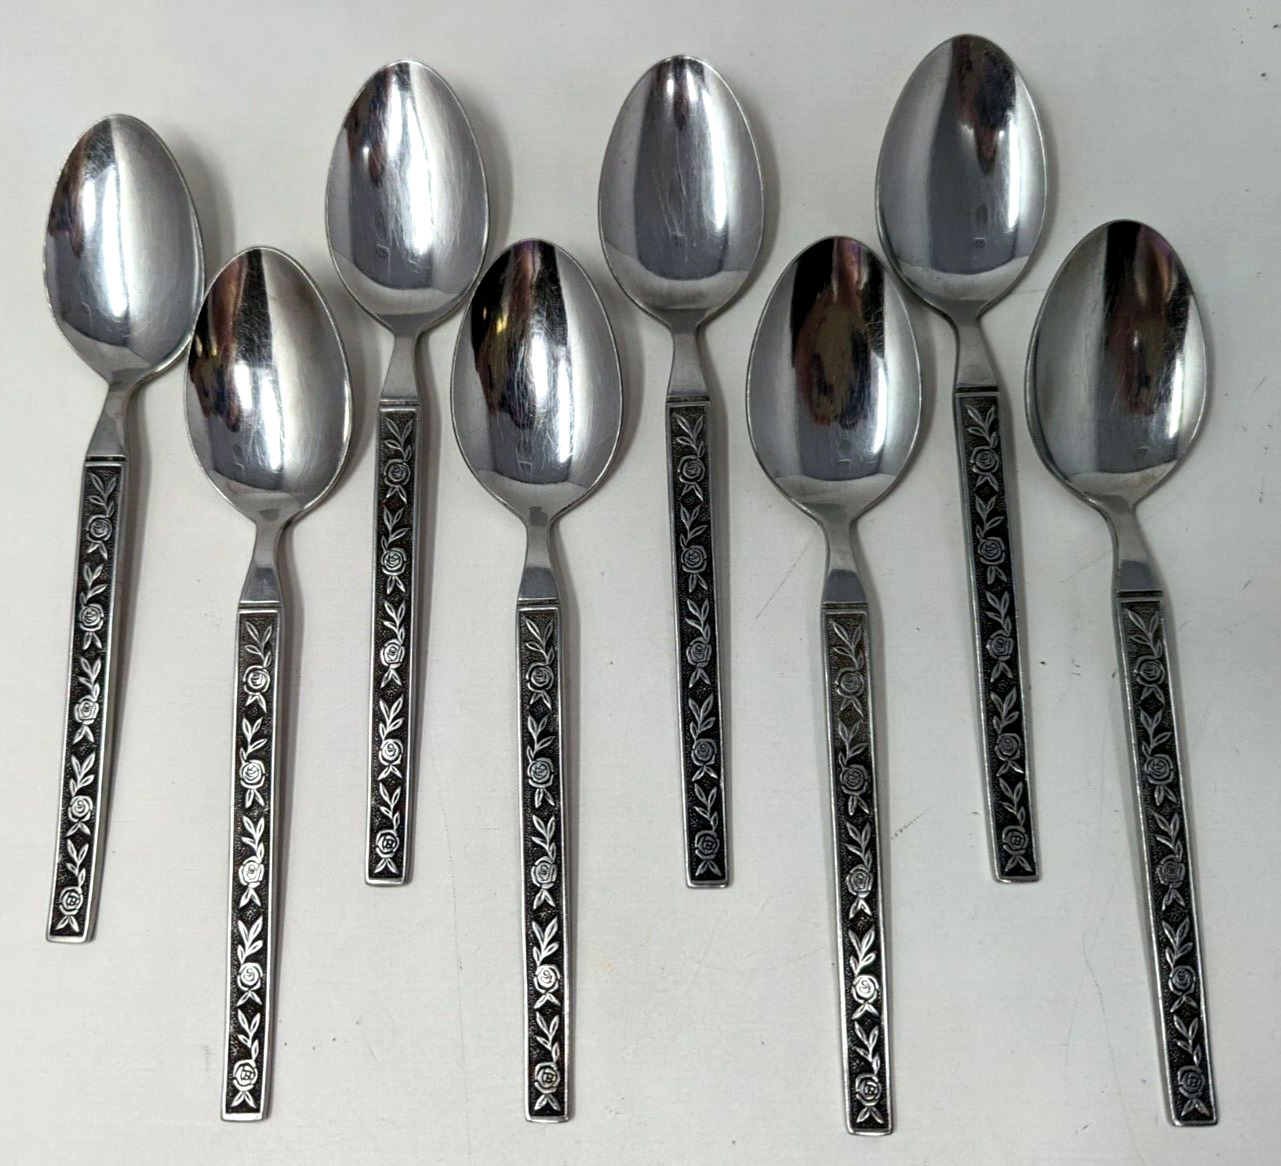 VTG Interpur Stainless Steel Mexicaly Rose Place Soup Spoon 8 Set Japan KP21